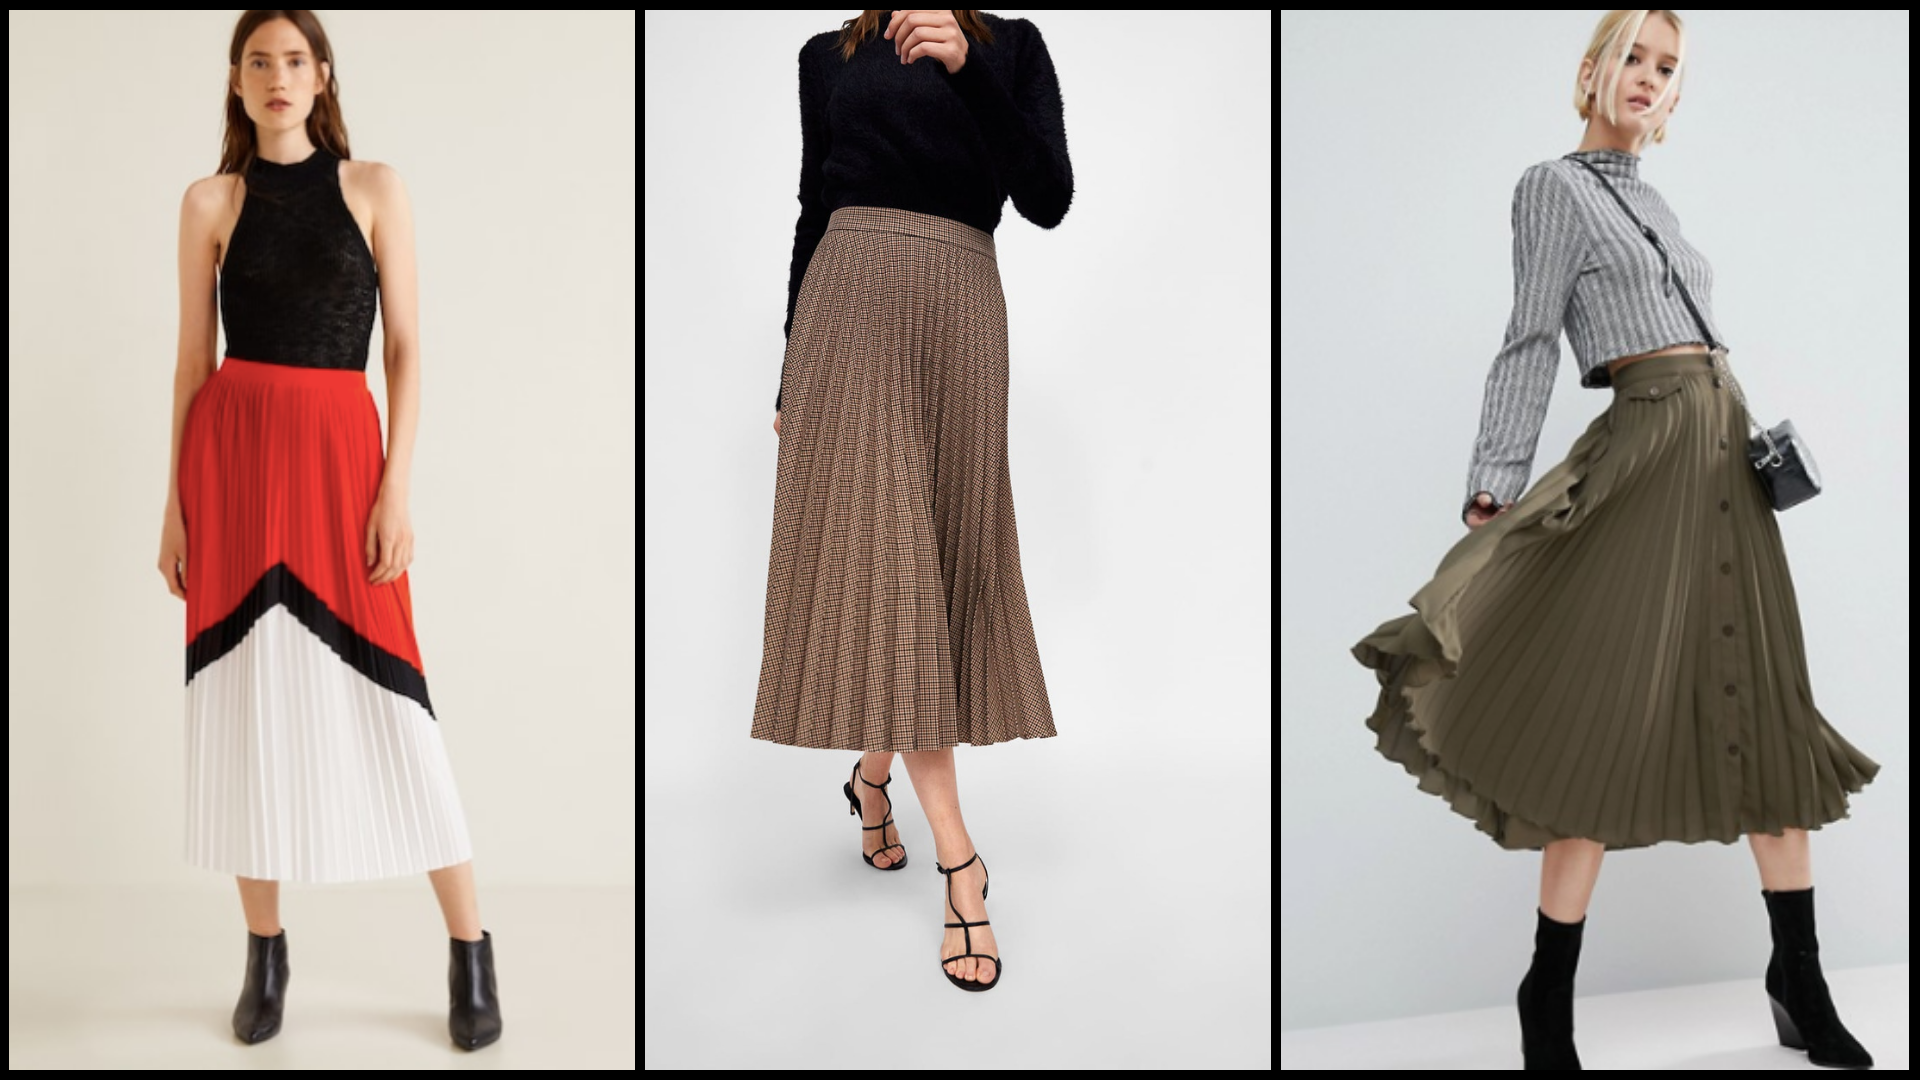 The Pleated Skirt + Chunky Knit Trend | #TrendReport – FASHION ENGLISH